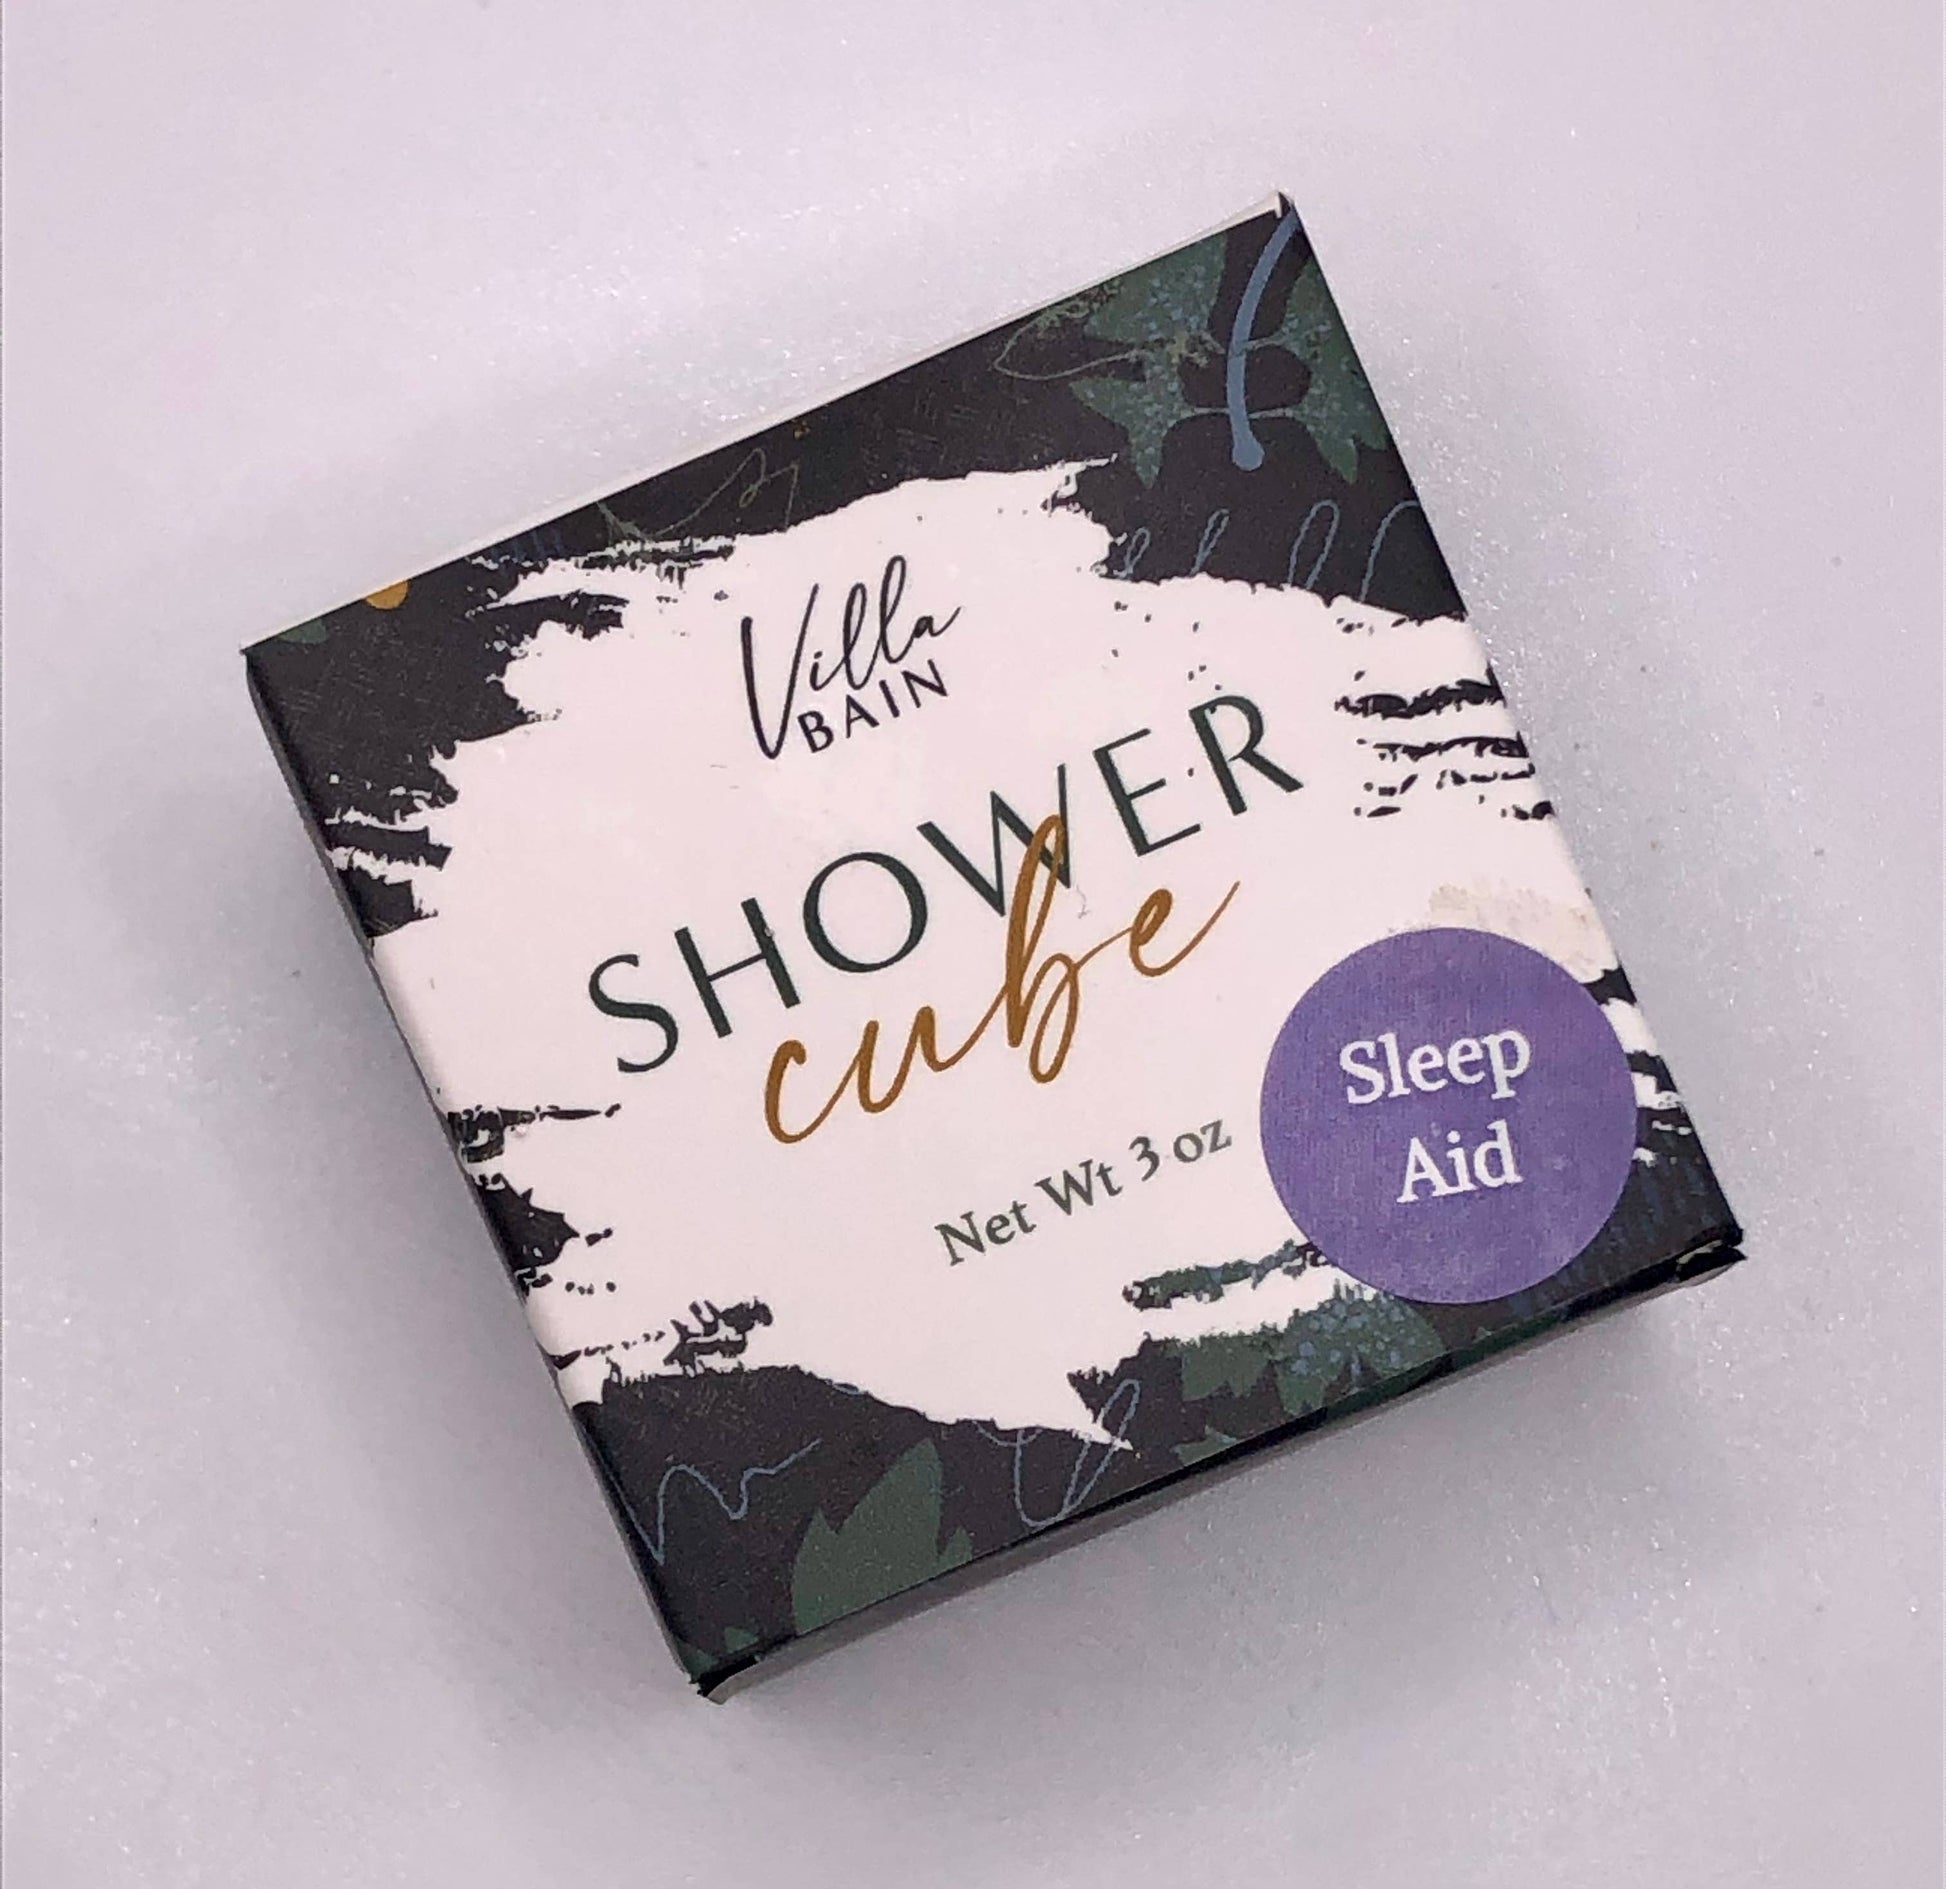 Bath Additives Shower Cube - Sleep Aid - Relaxing Spa Aromatherapy For the Shower VB-SA